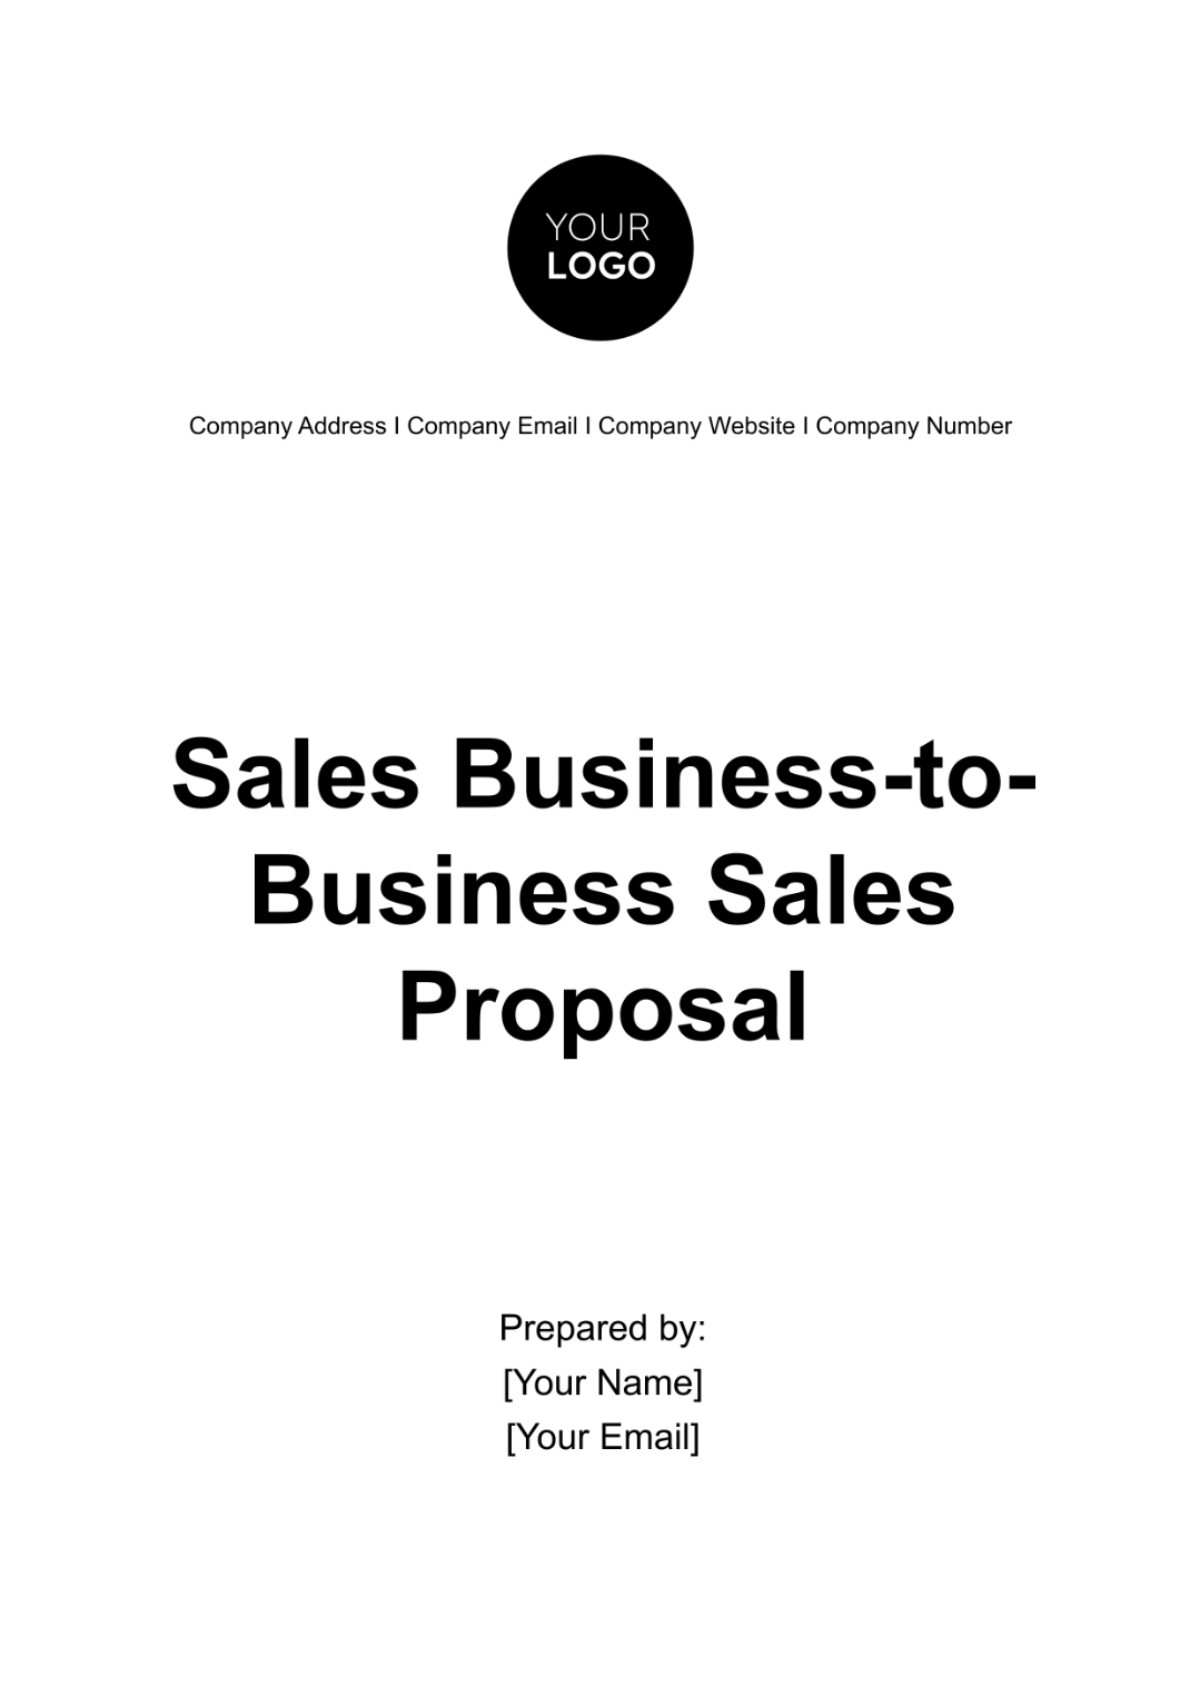 Free Sales Business-to-Business Sales Proposal Template